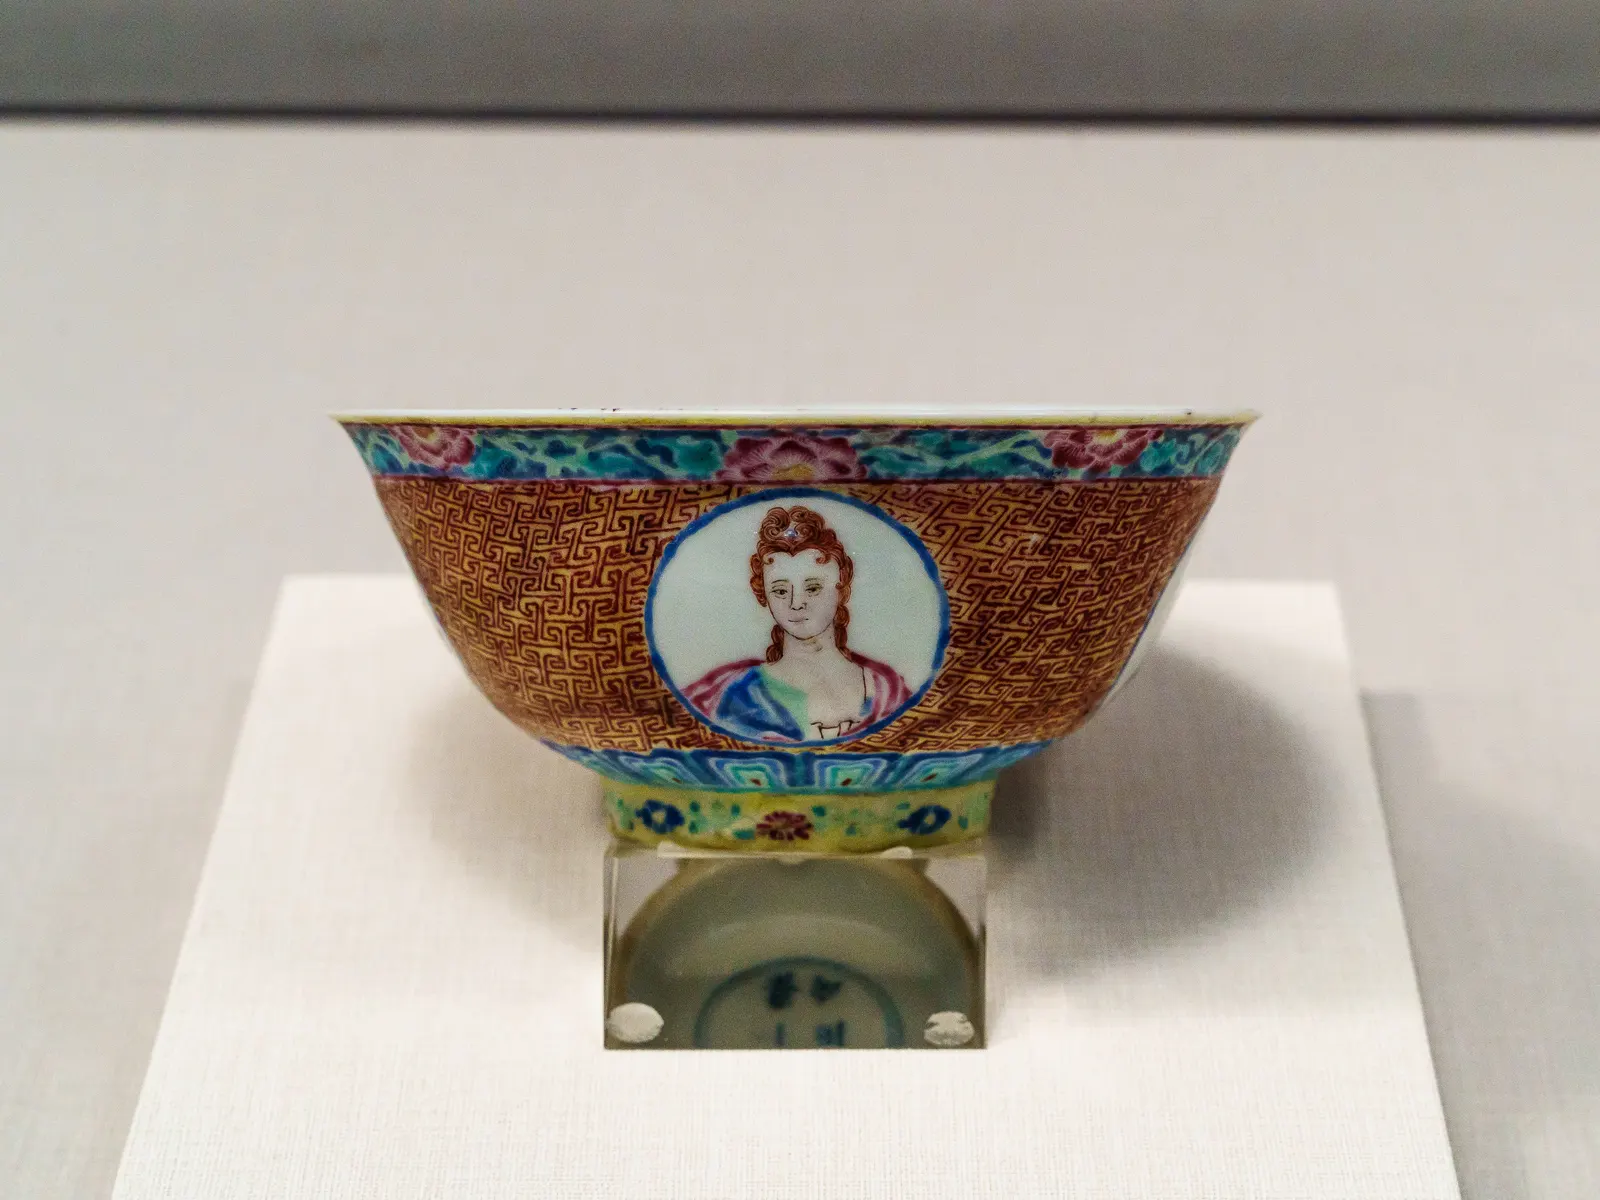 A porcelain bowl with ornate patterns and a central portrait of a woman.